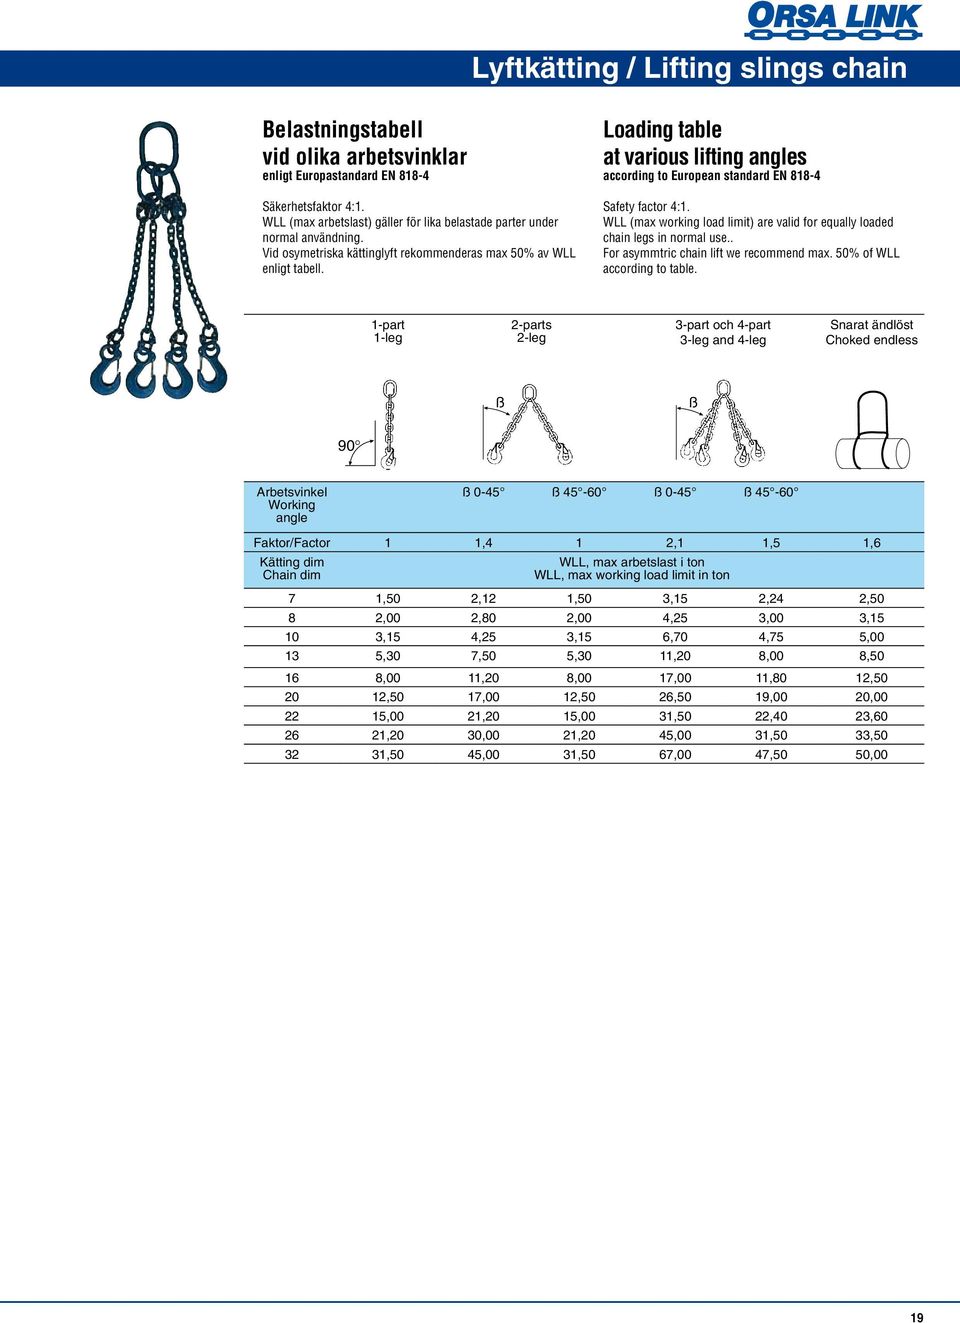 oading table at various lifting angles according to European standard EN 818-4 Safety factor 4:1. W (max working load limit) are valid for equally loaded chain legs in normal use.